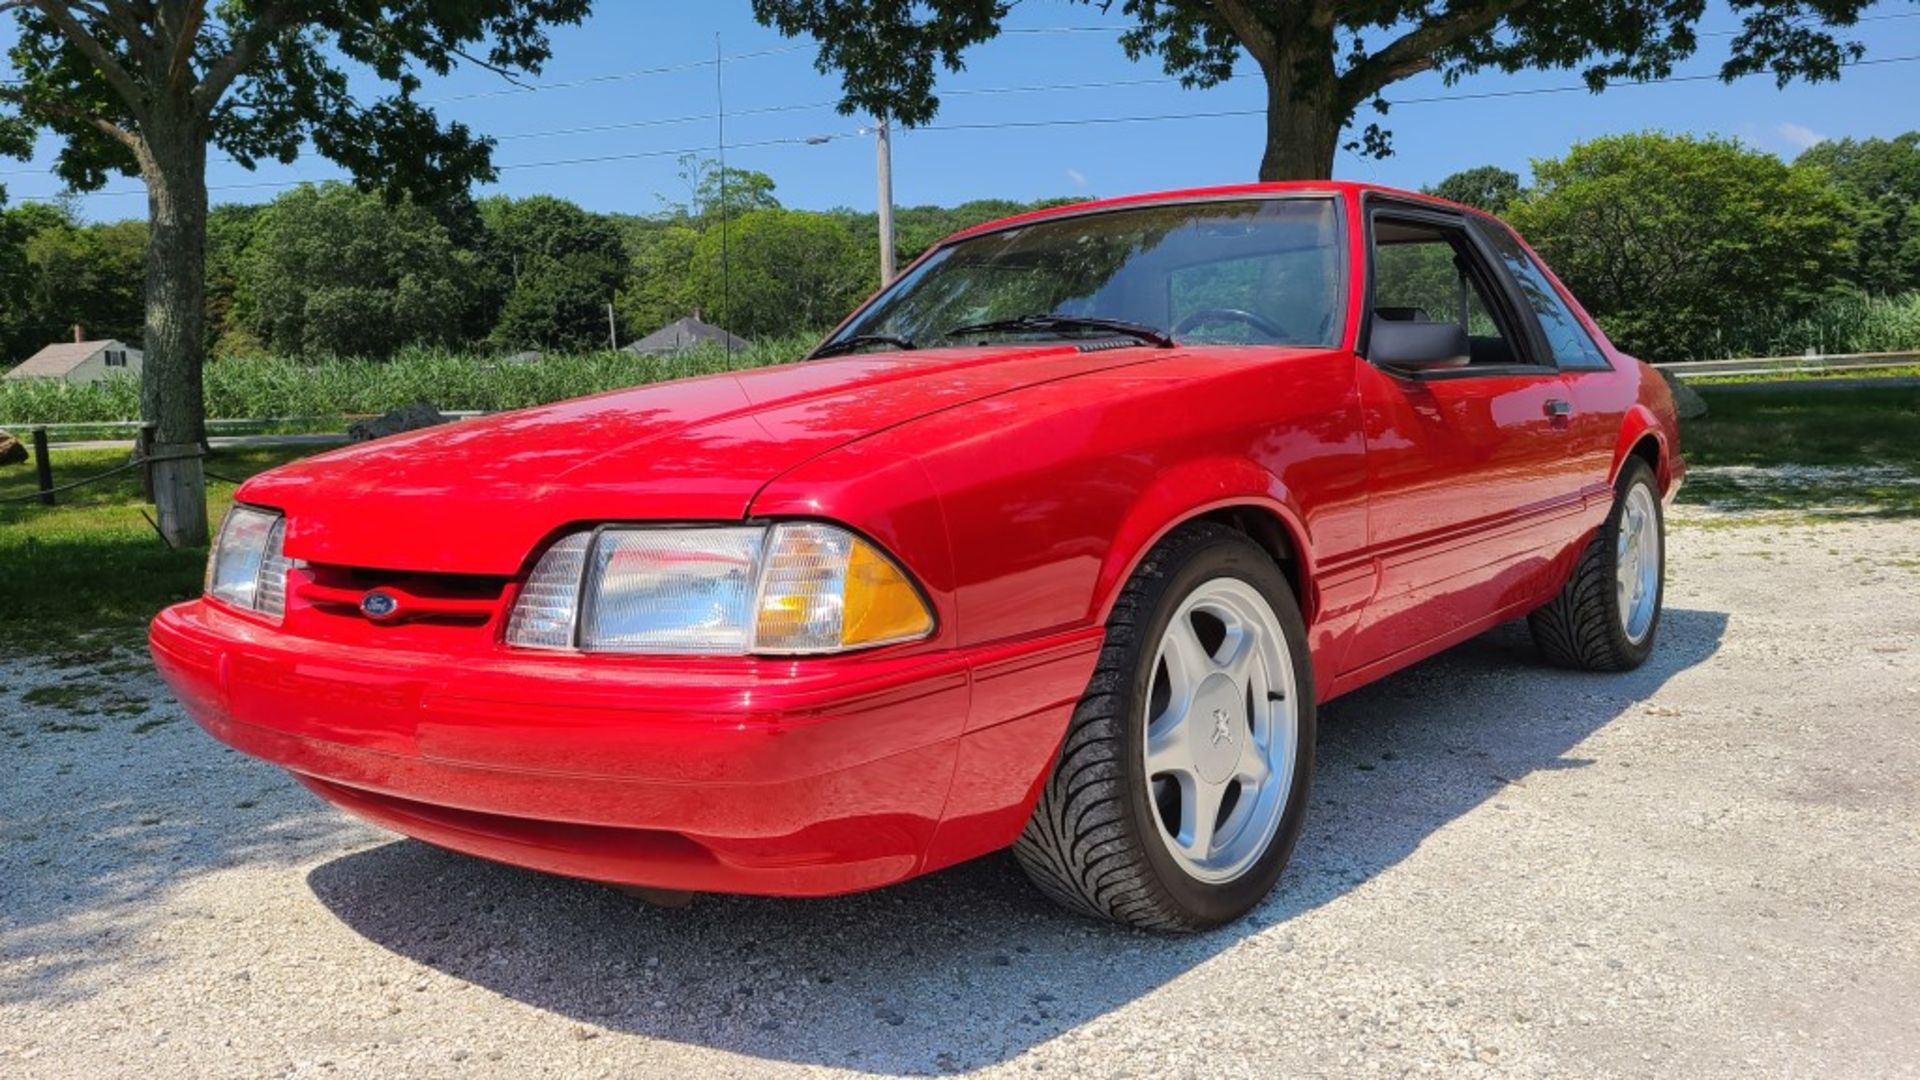 1992 Ford Mustang Lx Notchback - Image 3 of 13